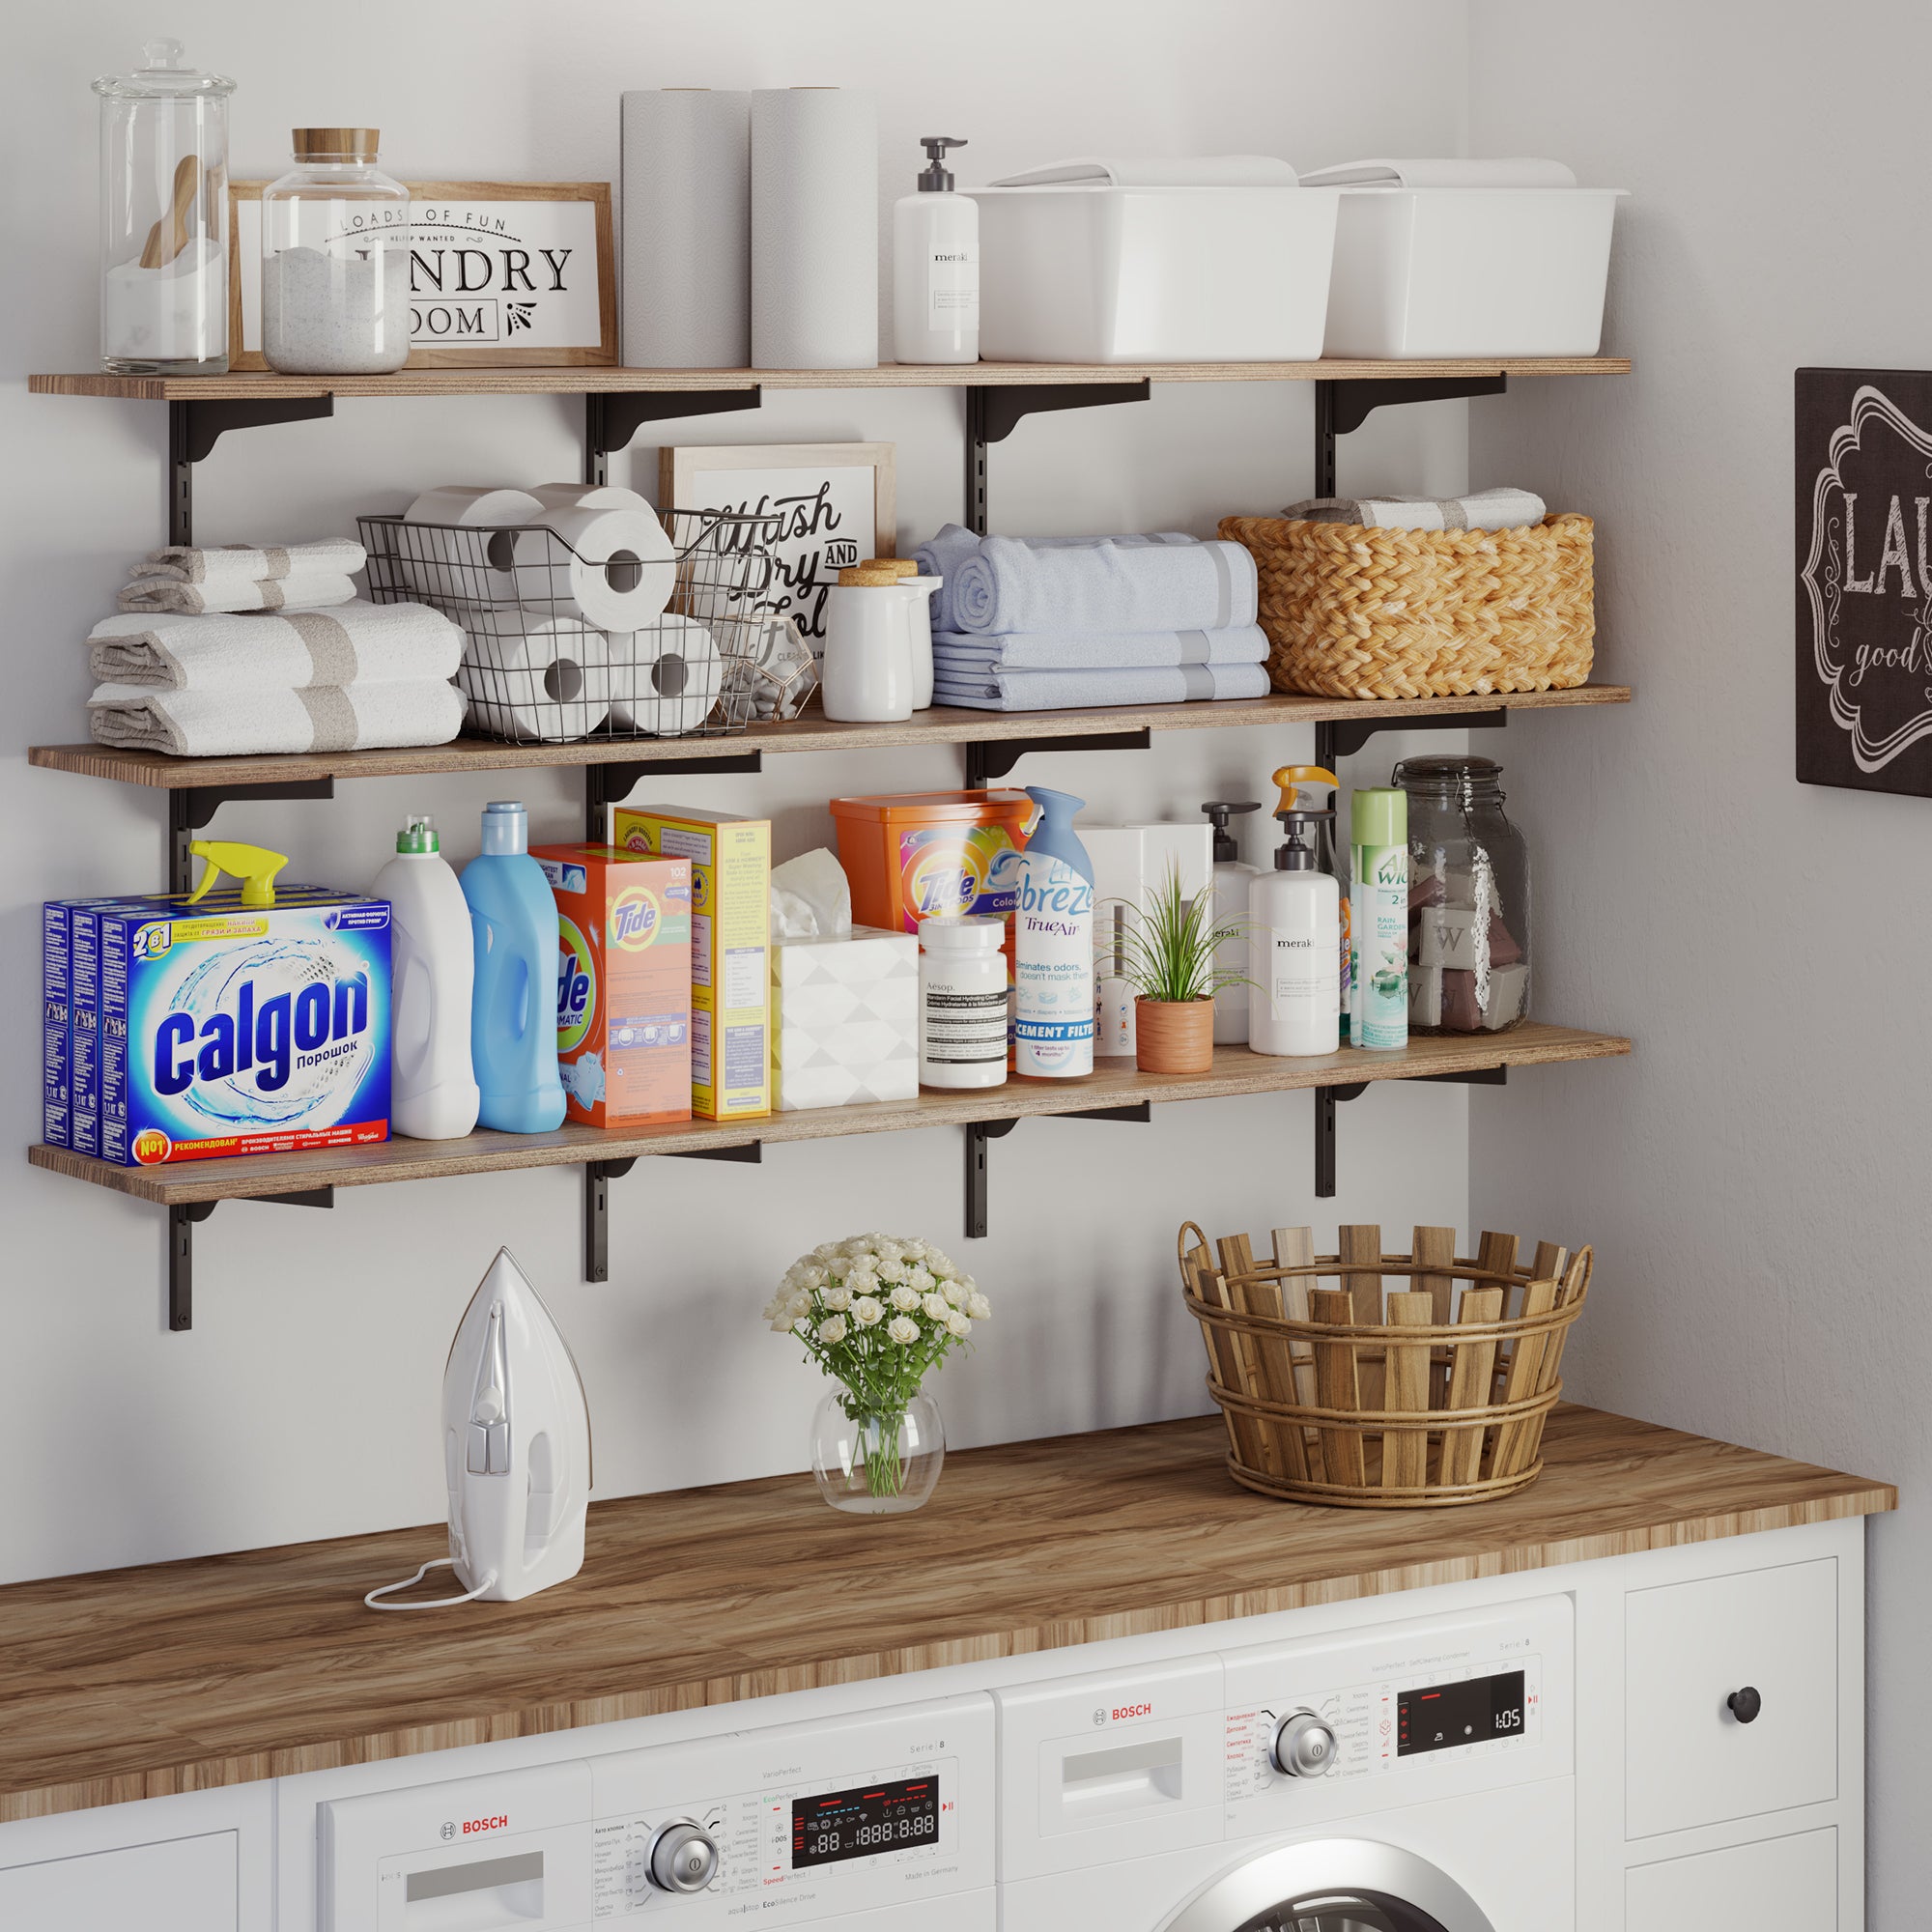 Laundry room storage with wooden shelves, black brackets, laundry essentials, and woven baskets on a washer and dryer.